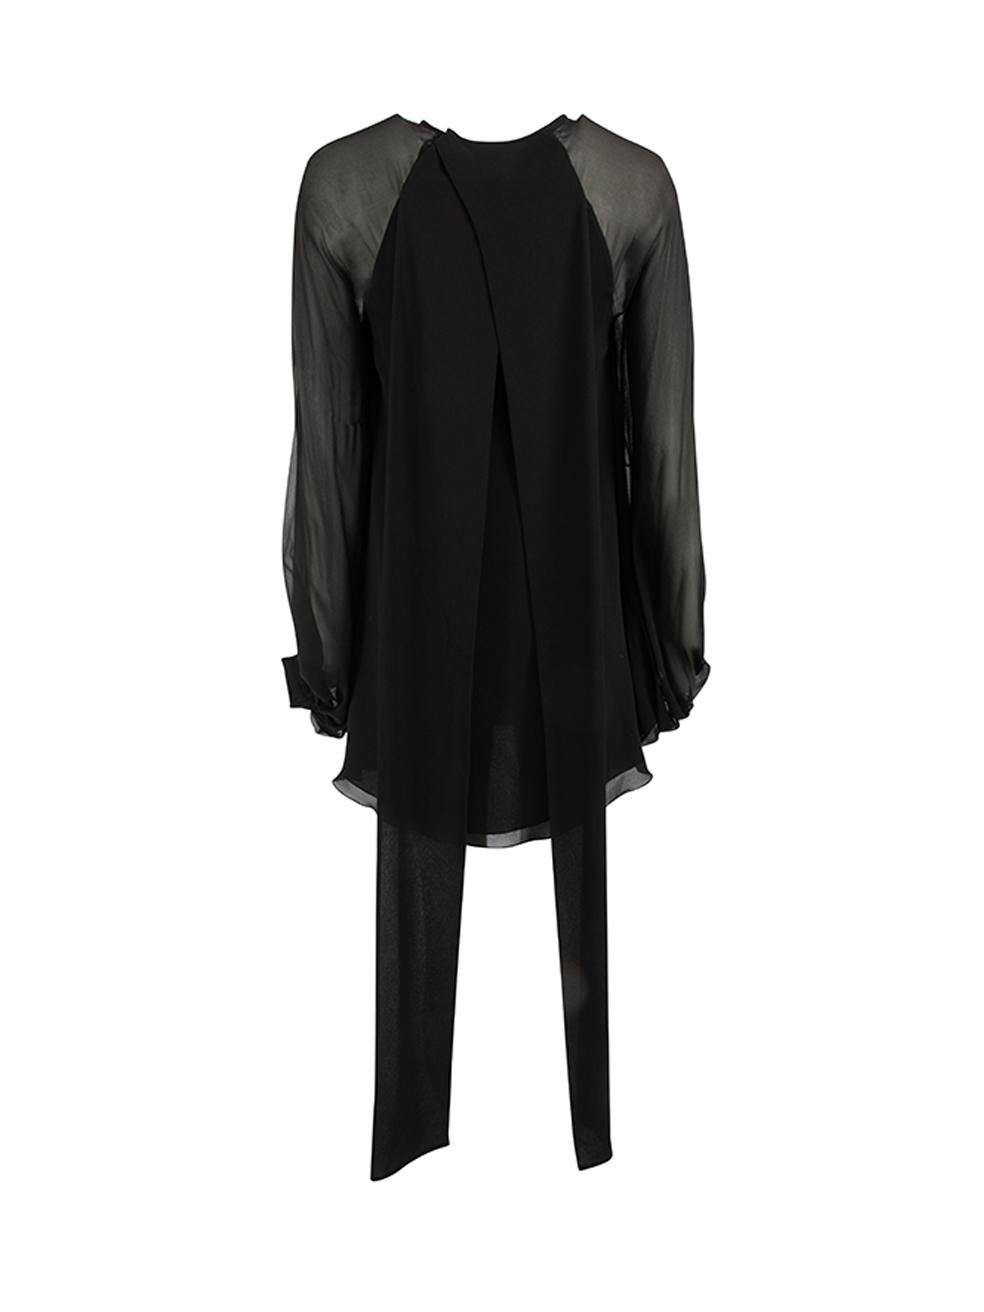 Pre-Loved Saint Laurent Women's Black Sheer Drape Ribbon Blouse In Excellent Condition In London, GB